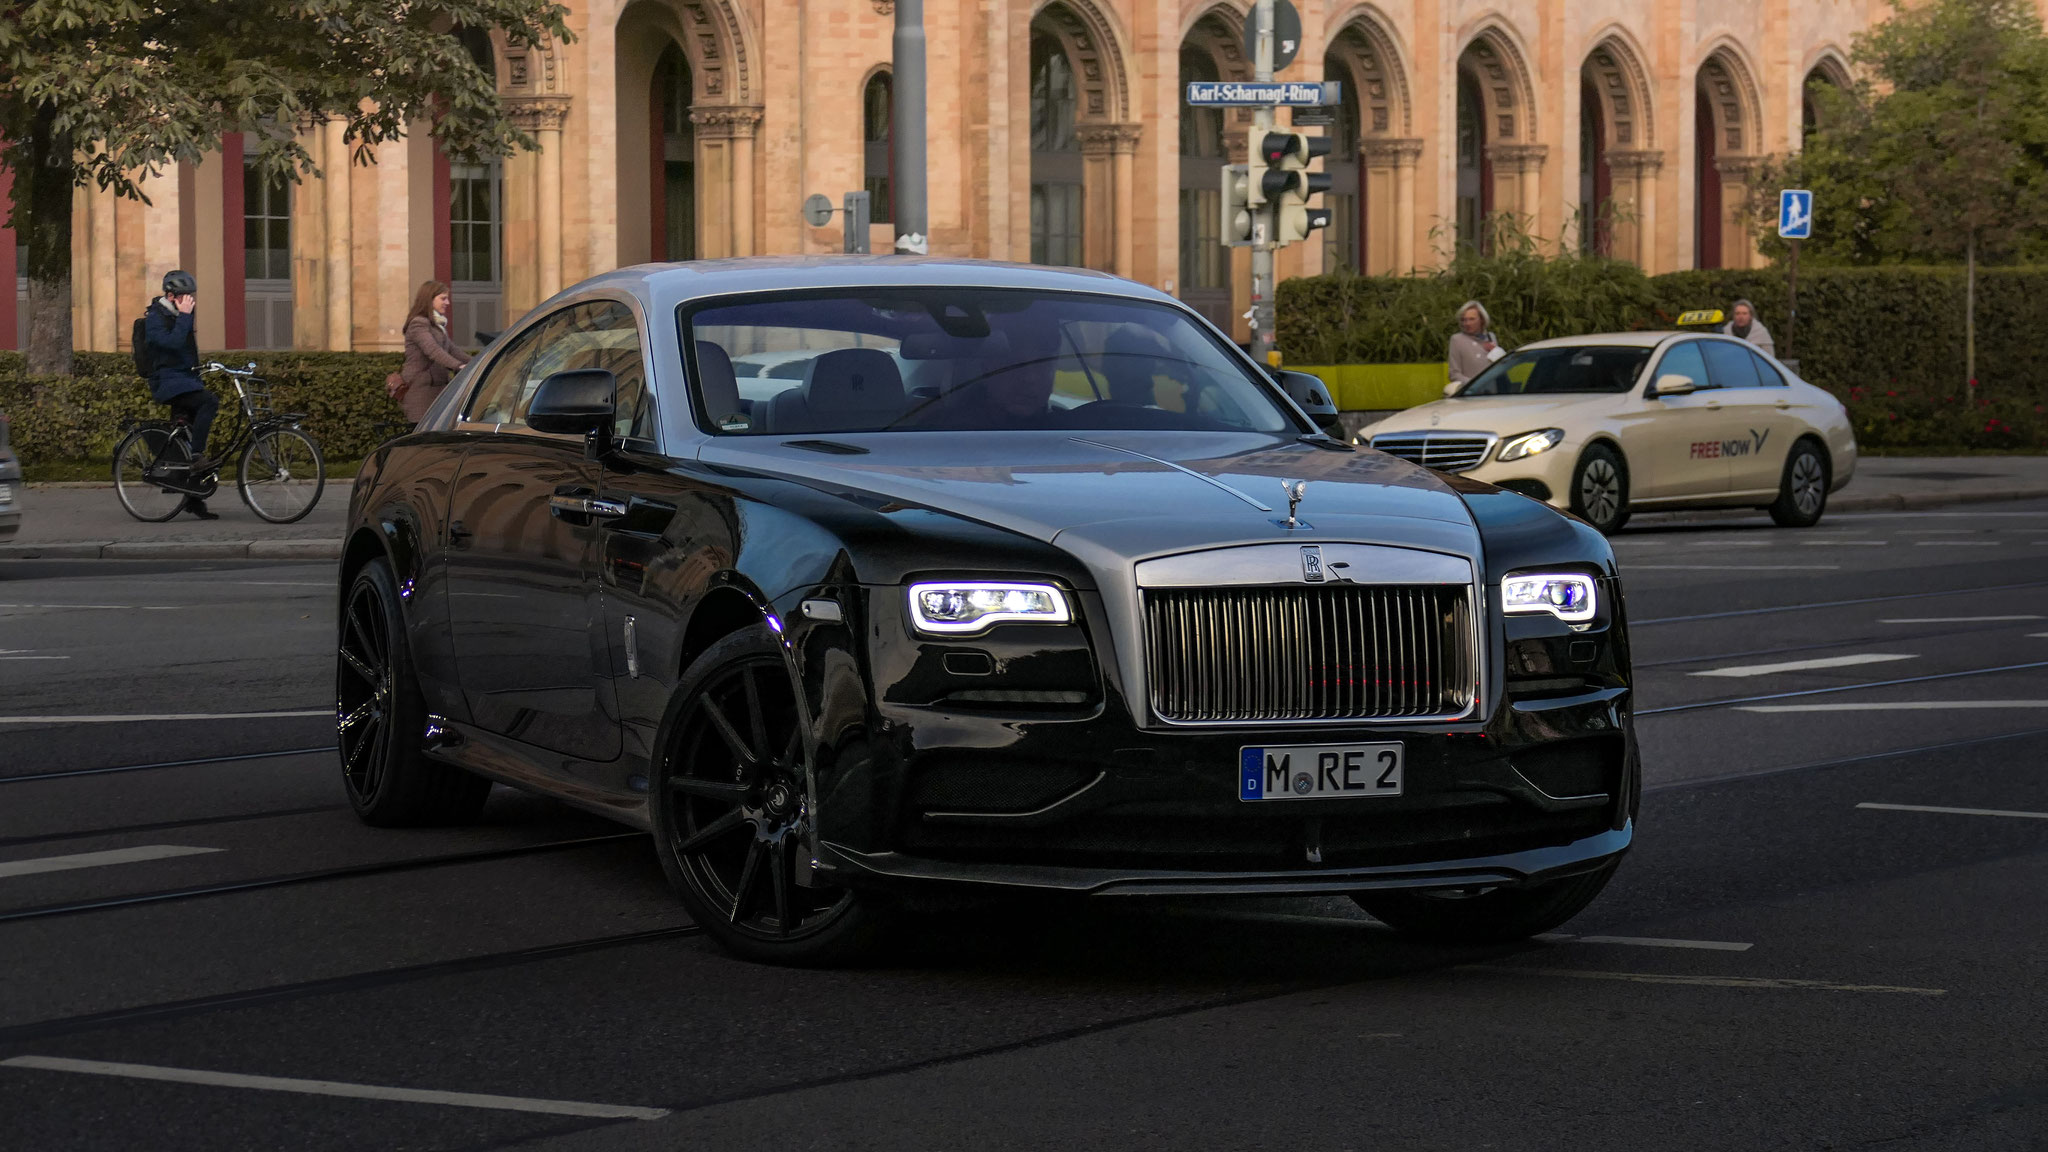 Rolls Royce Wraith Ares - M-RE2